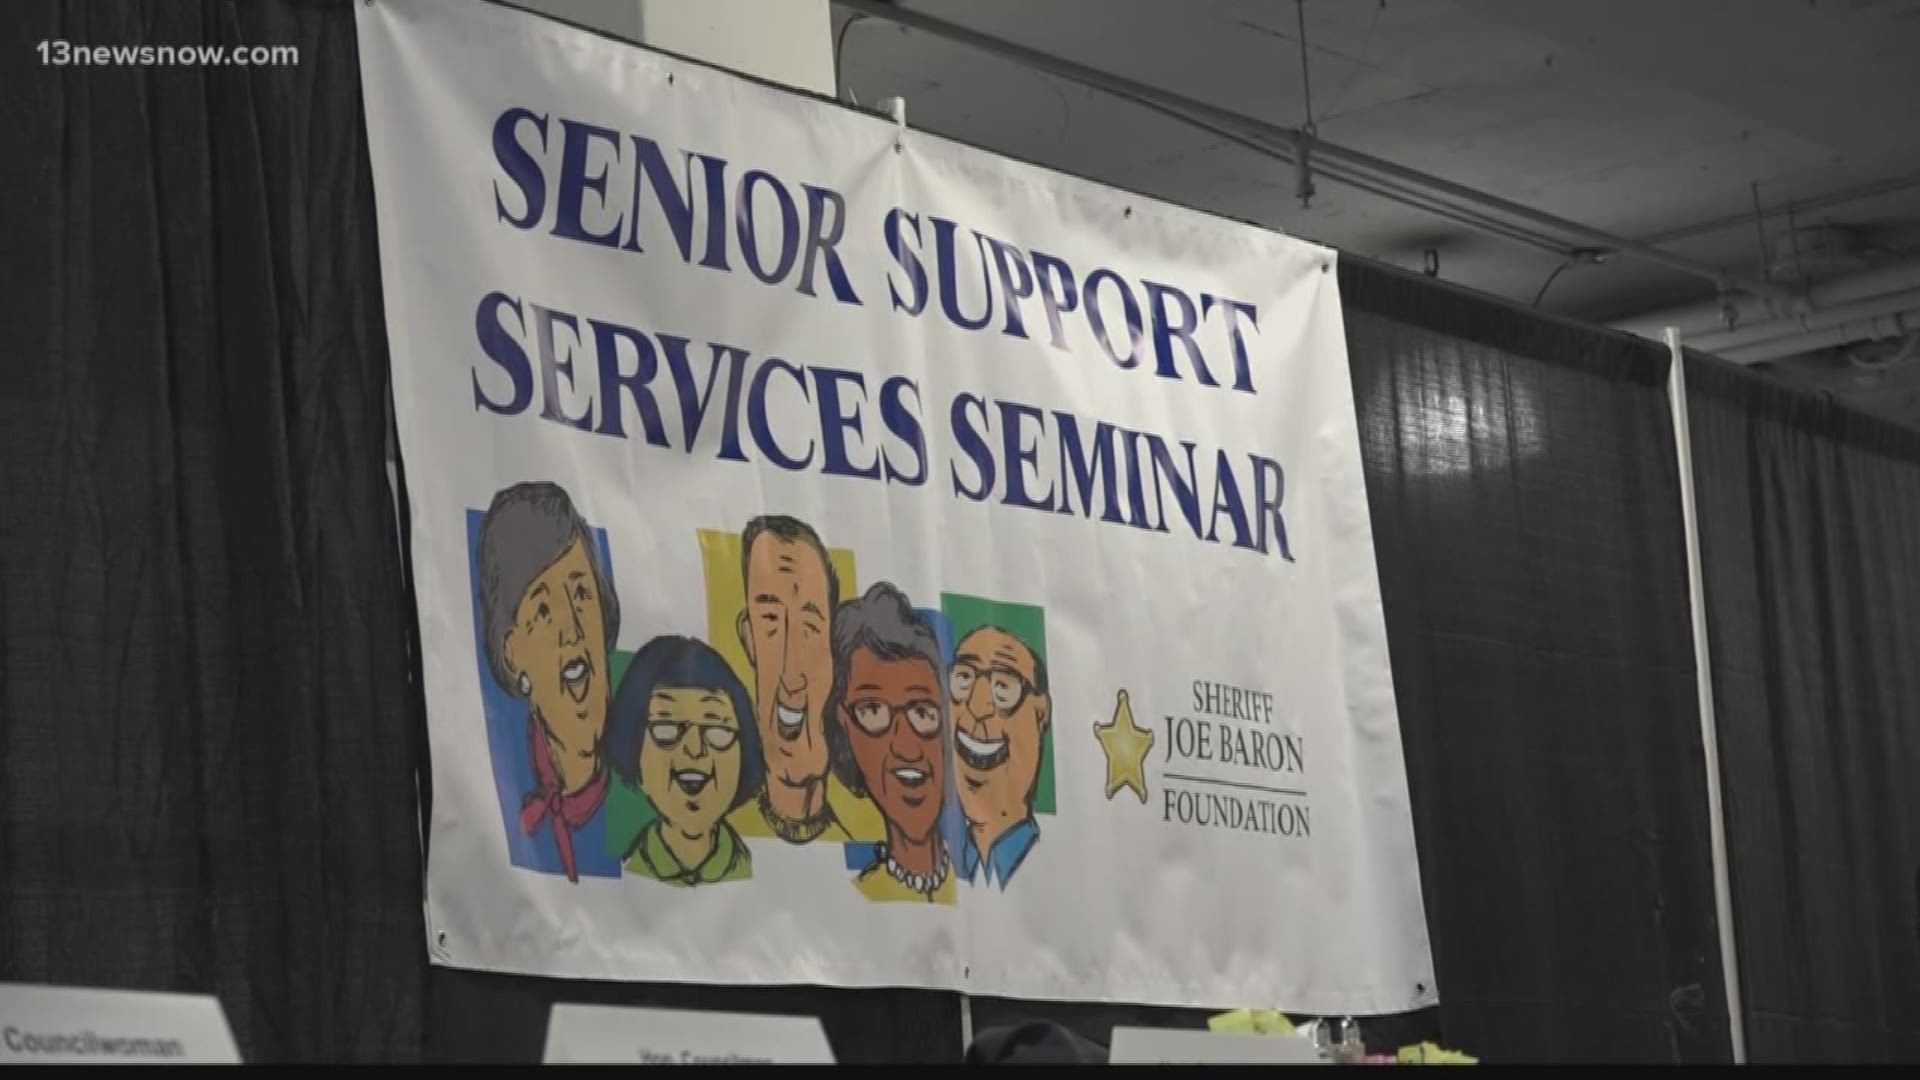 Sherrif Joe Barron hosted the Senior Fest to help seniors learn about resources, community events, and health screenings.